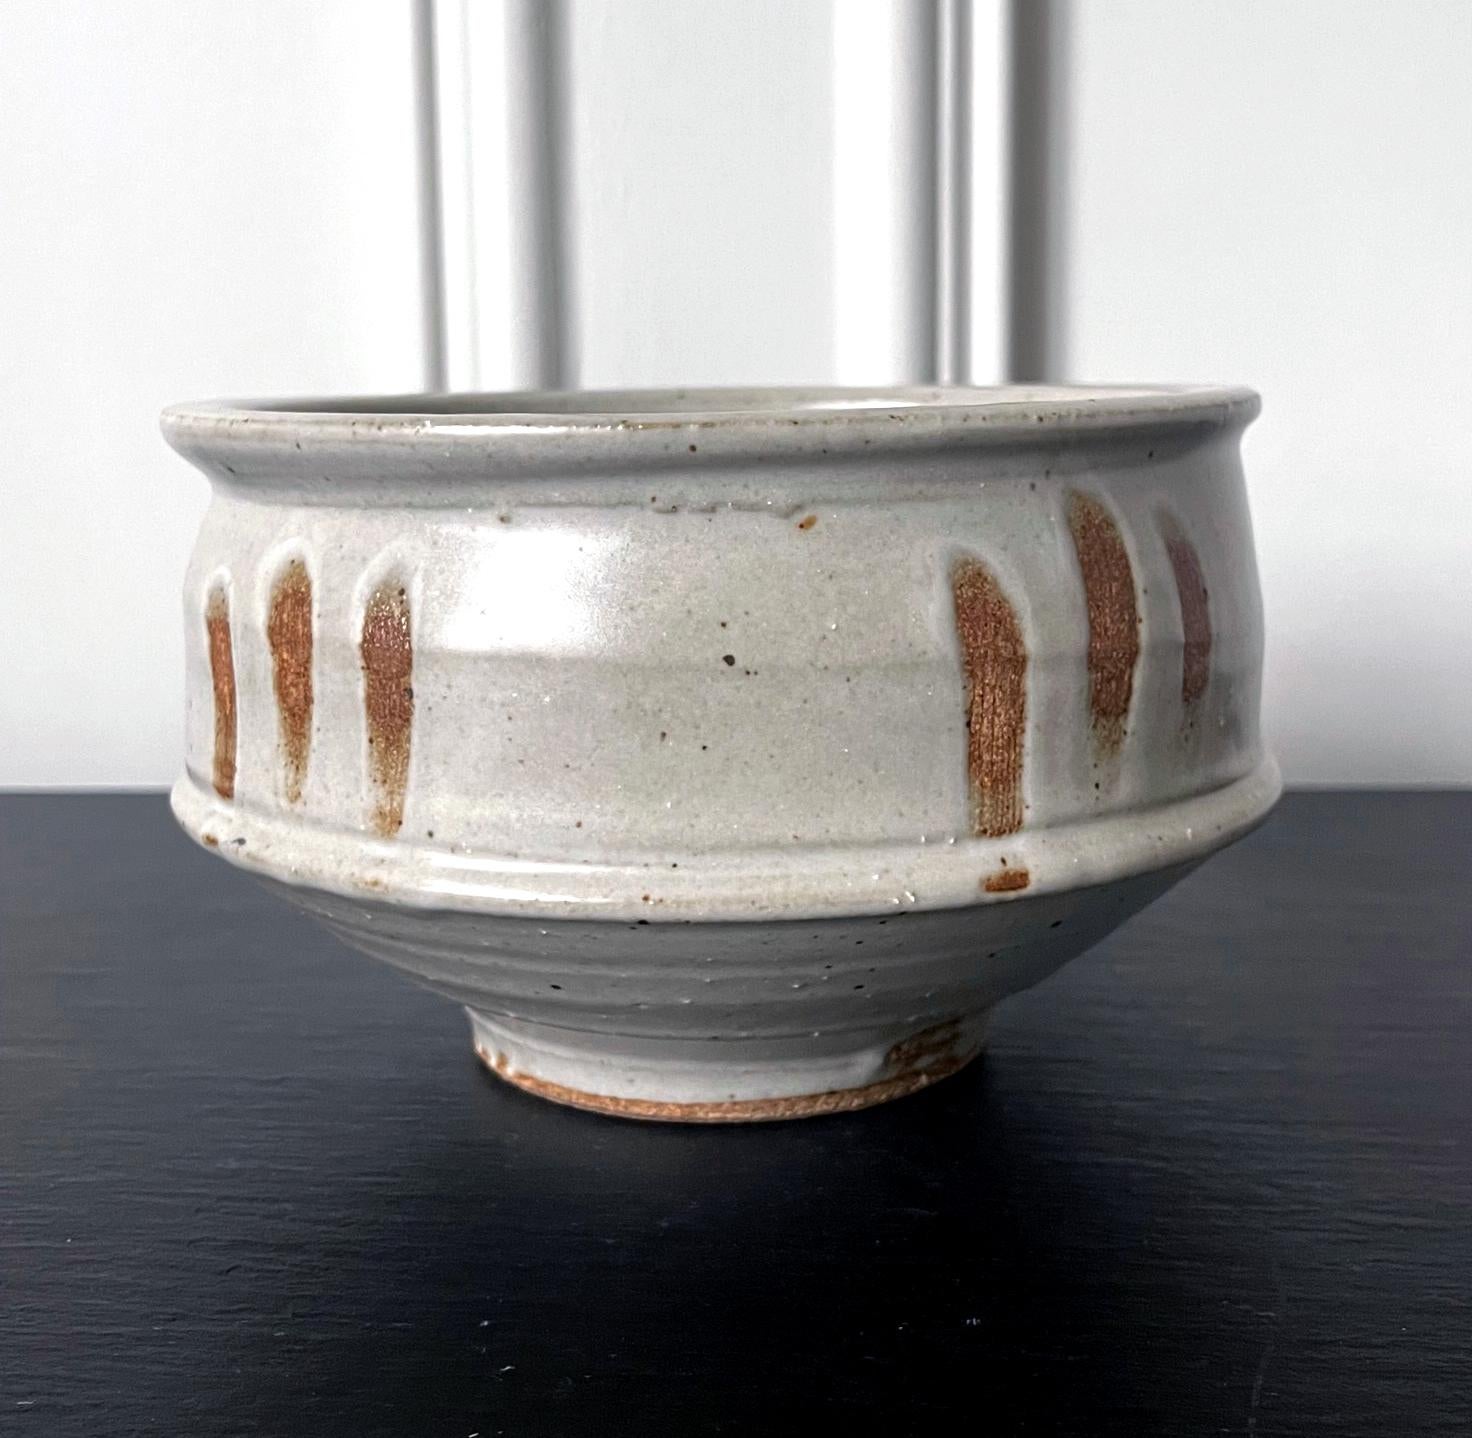 A stoneware center bowl by American ceramist Warren Mackenzie (1924-2018). Thickly potted in rather distinct shape with a prominent mouth rim and tapered lower body, the bowl appears both robust and elegant at the same time. The surface was covered